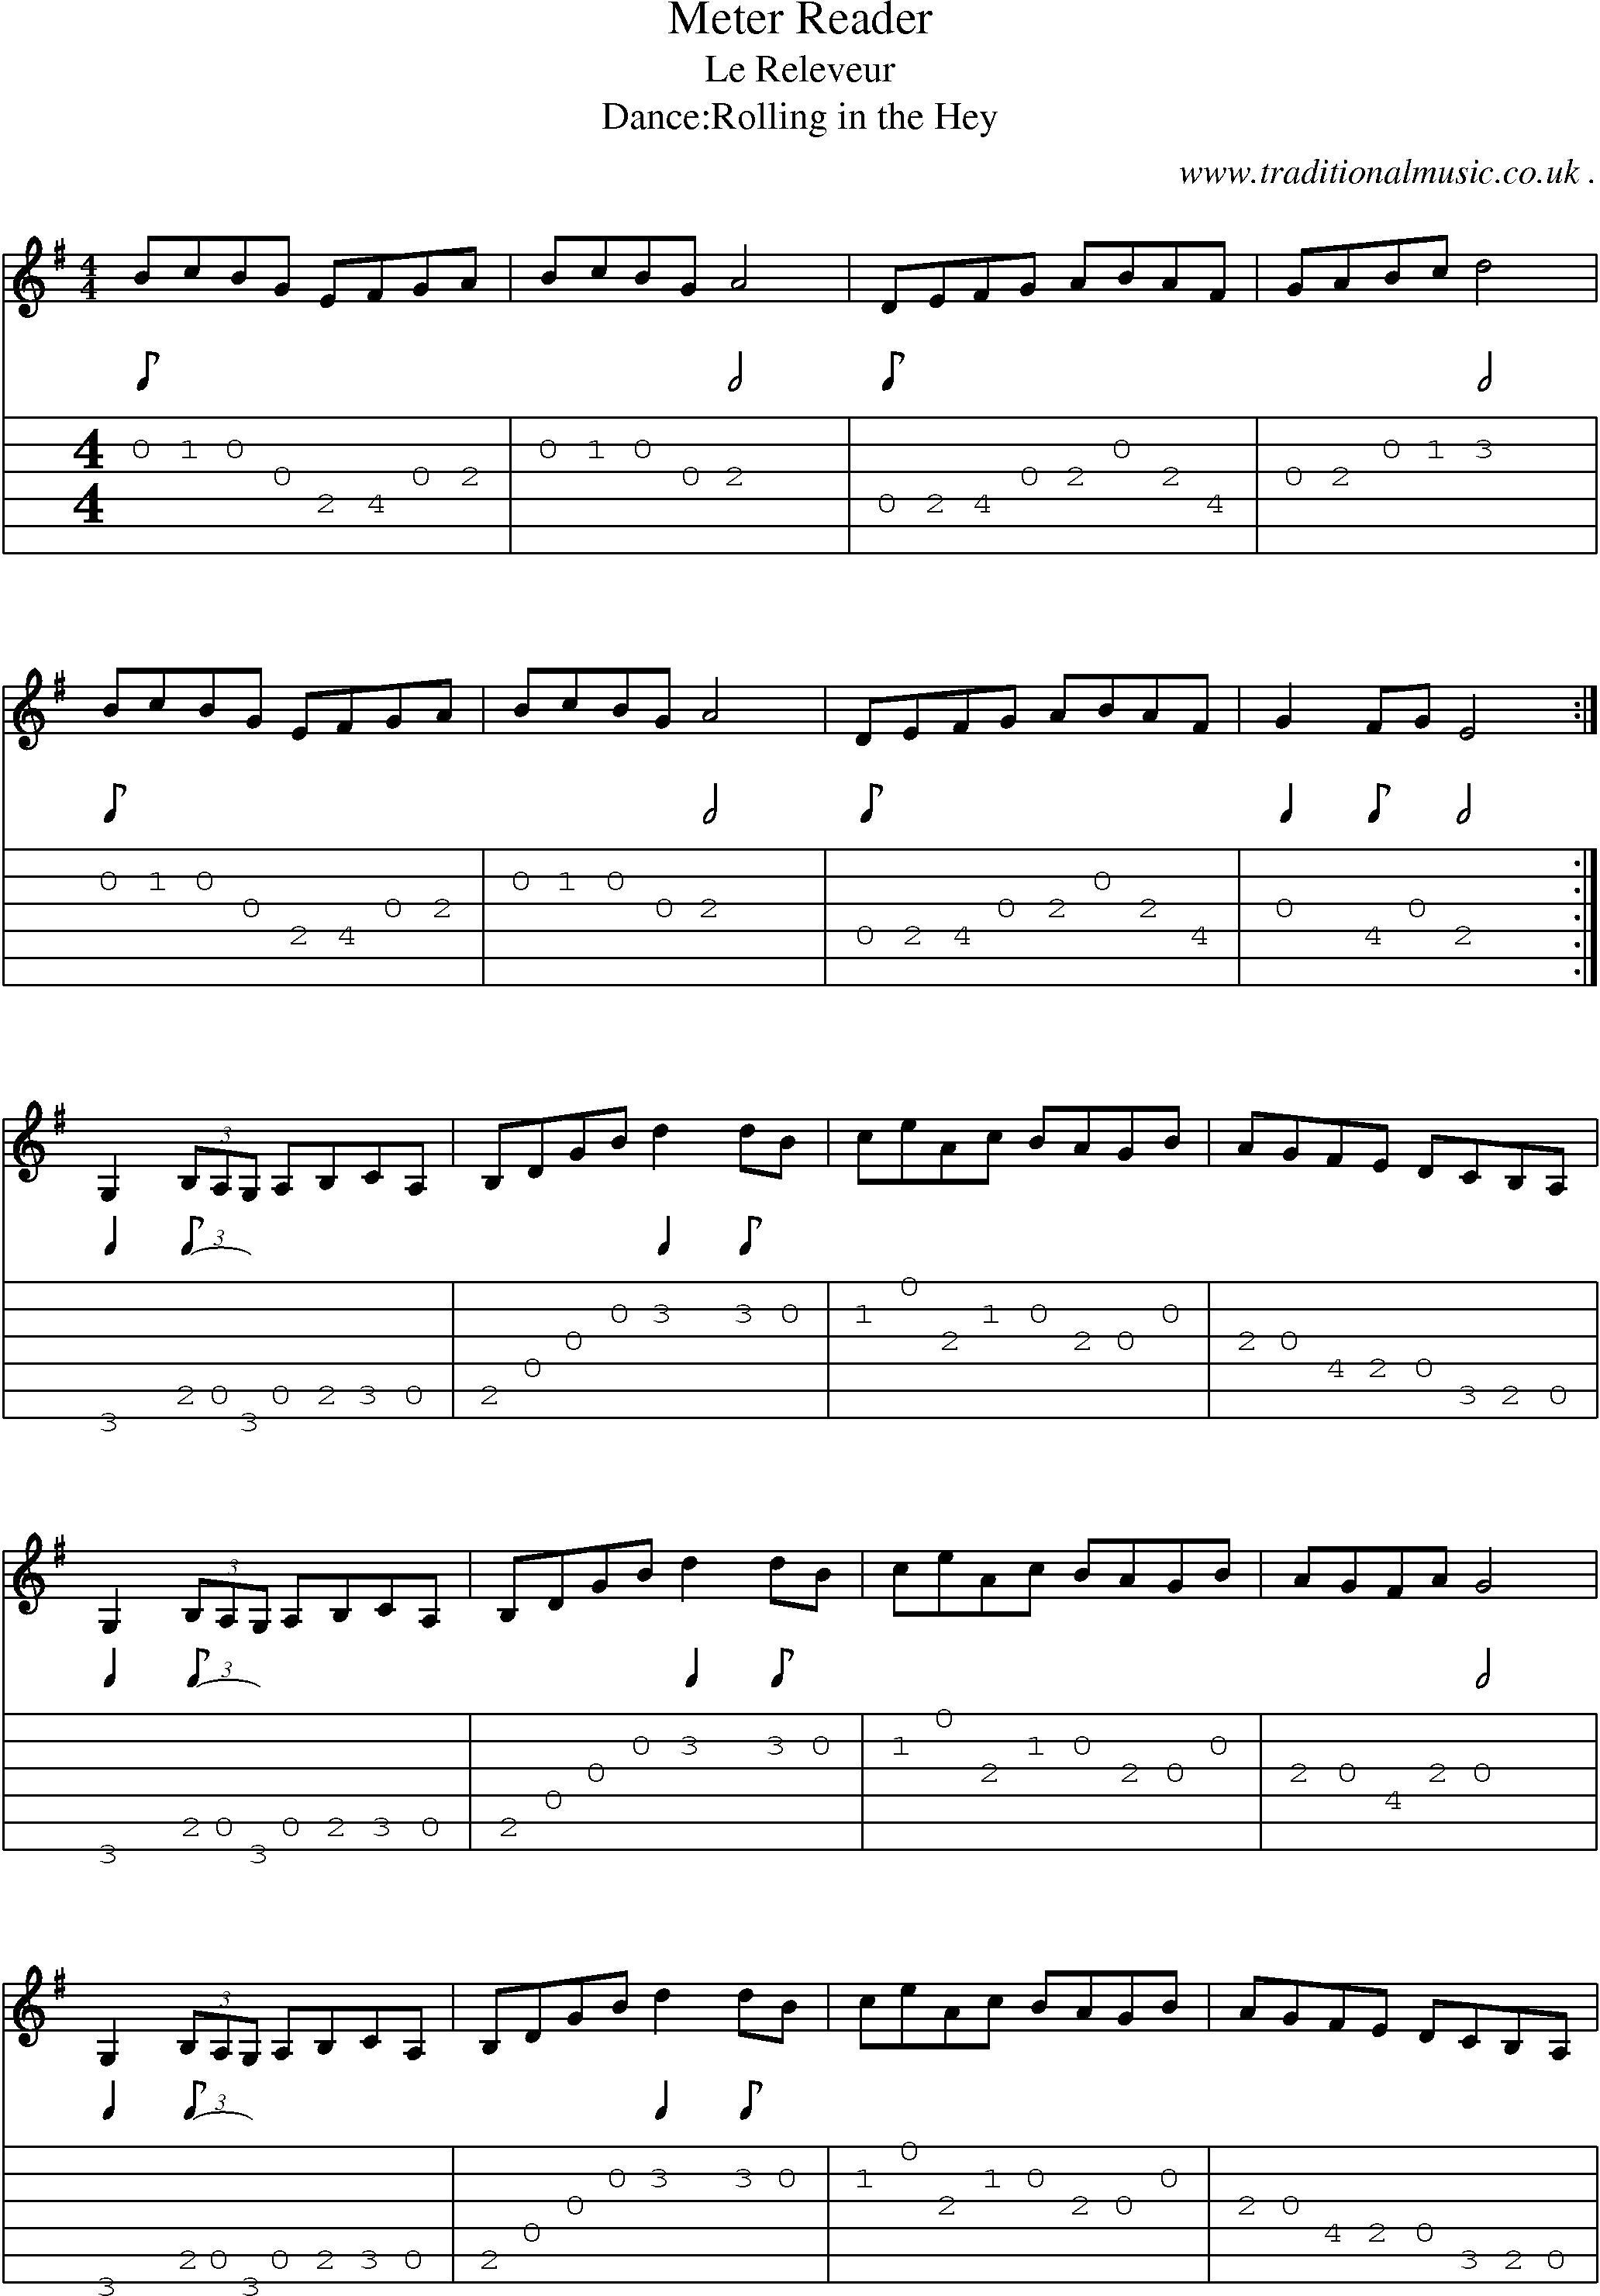 Sheet-Music and Guitar Tabs for Meter Reader